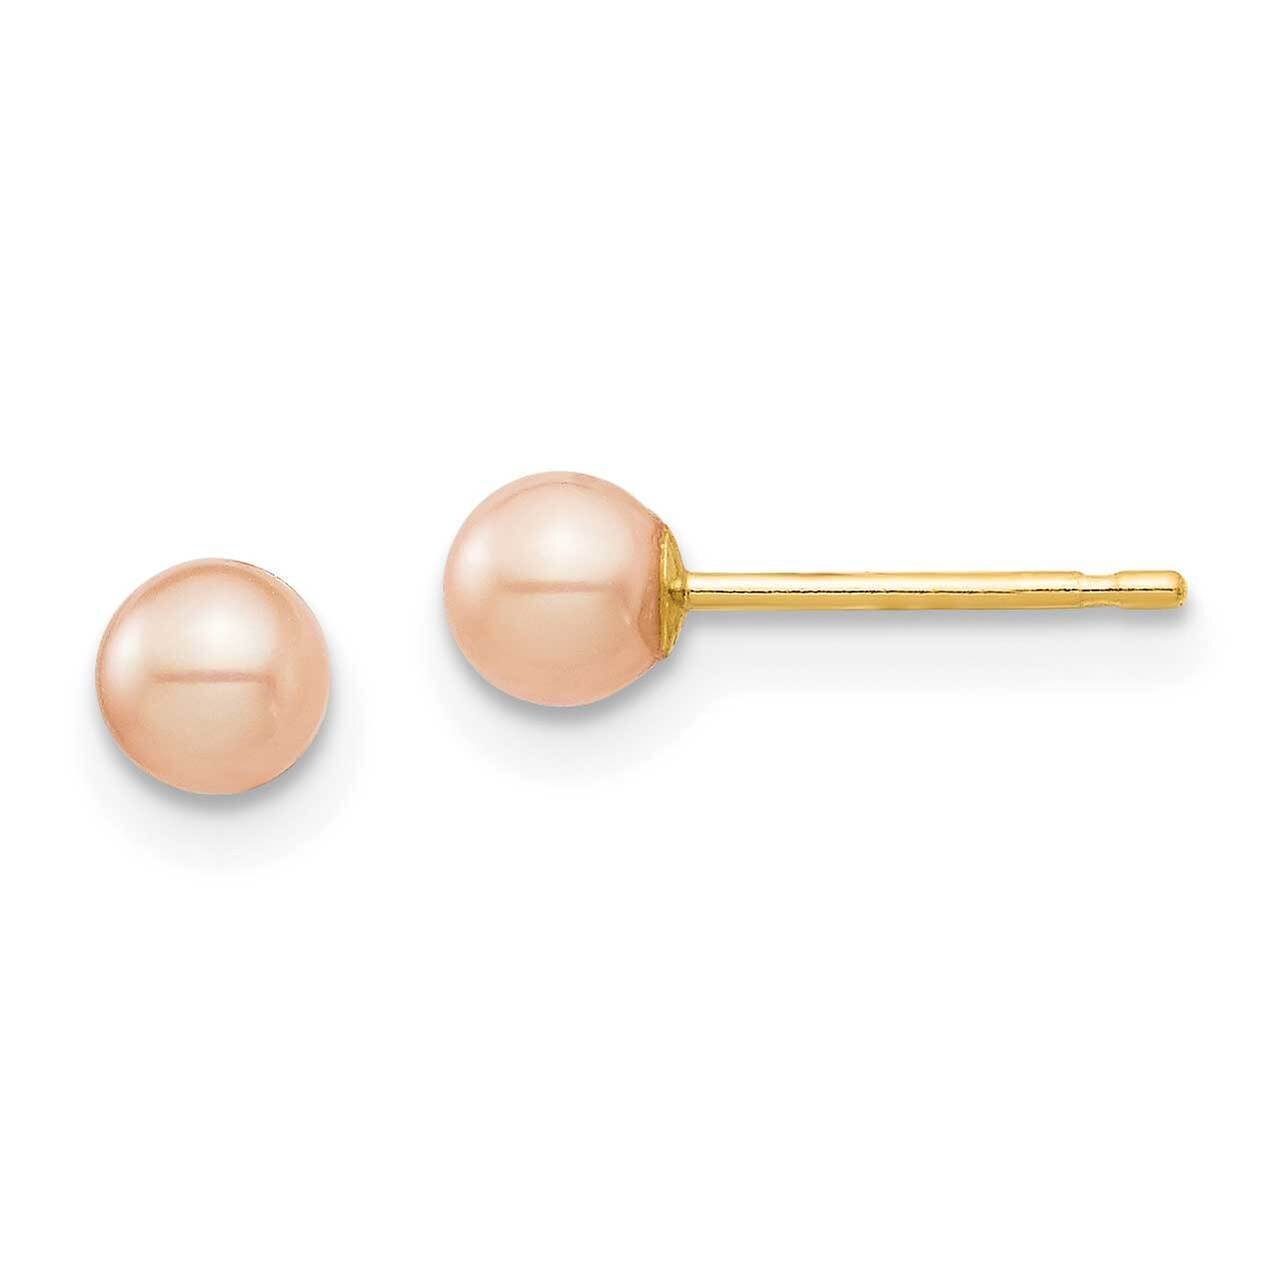 3-4mm Pink Round Freshwater Cultured Pearl Stud Post Earrings 14k Gold SE2926